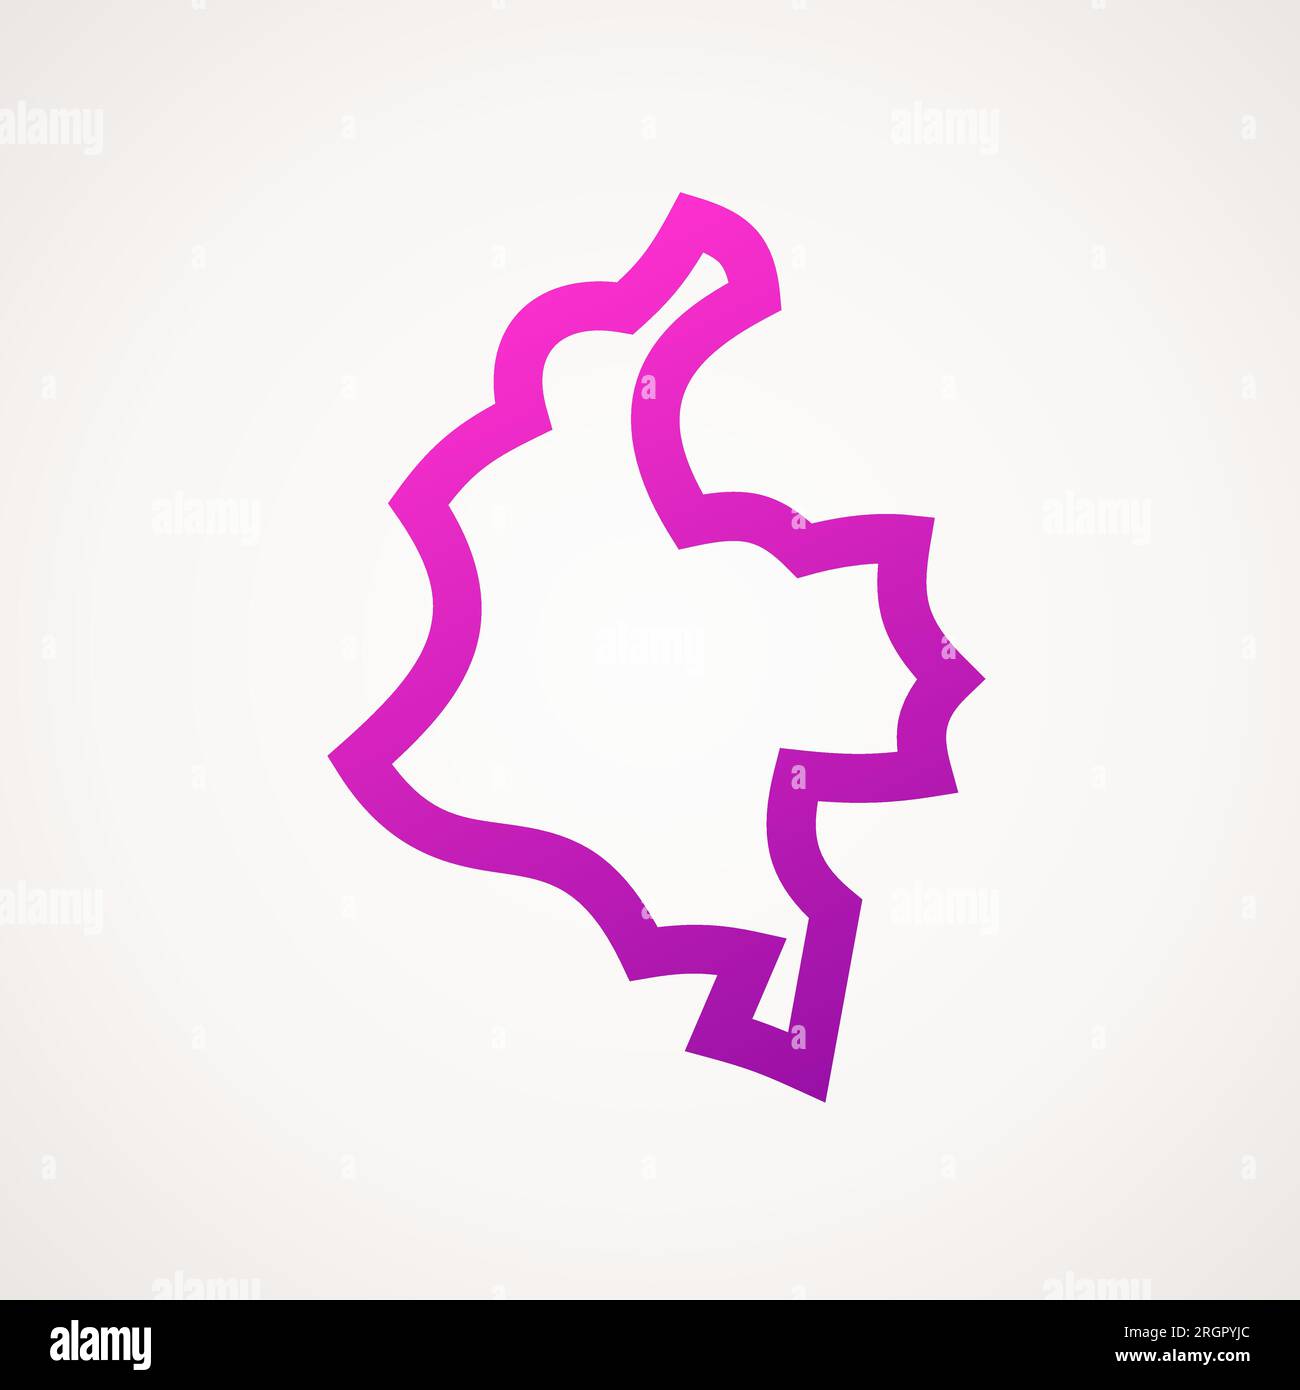 Simplified stylized outline map of Colombia. Stock Vector